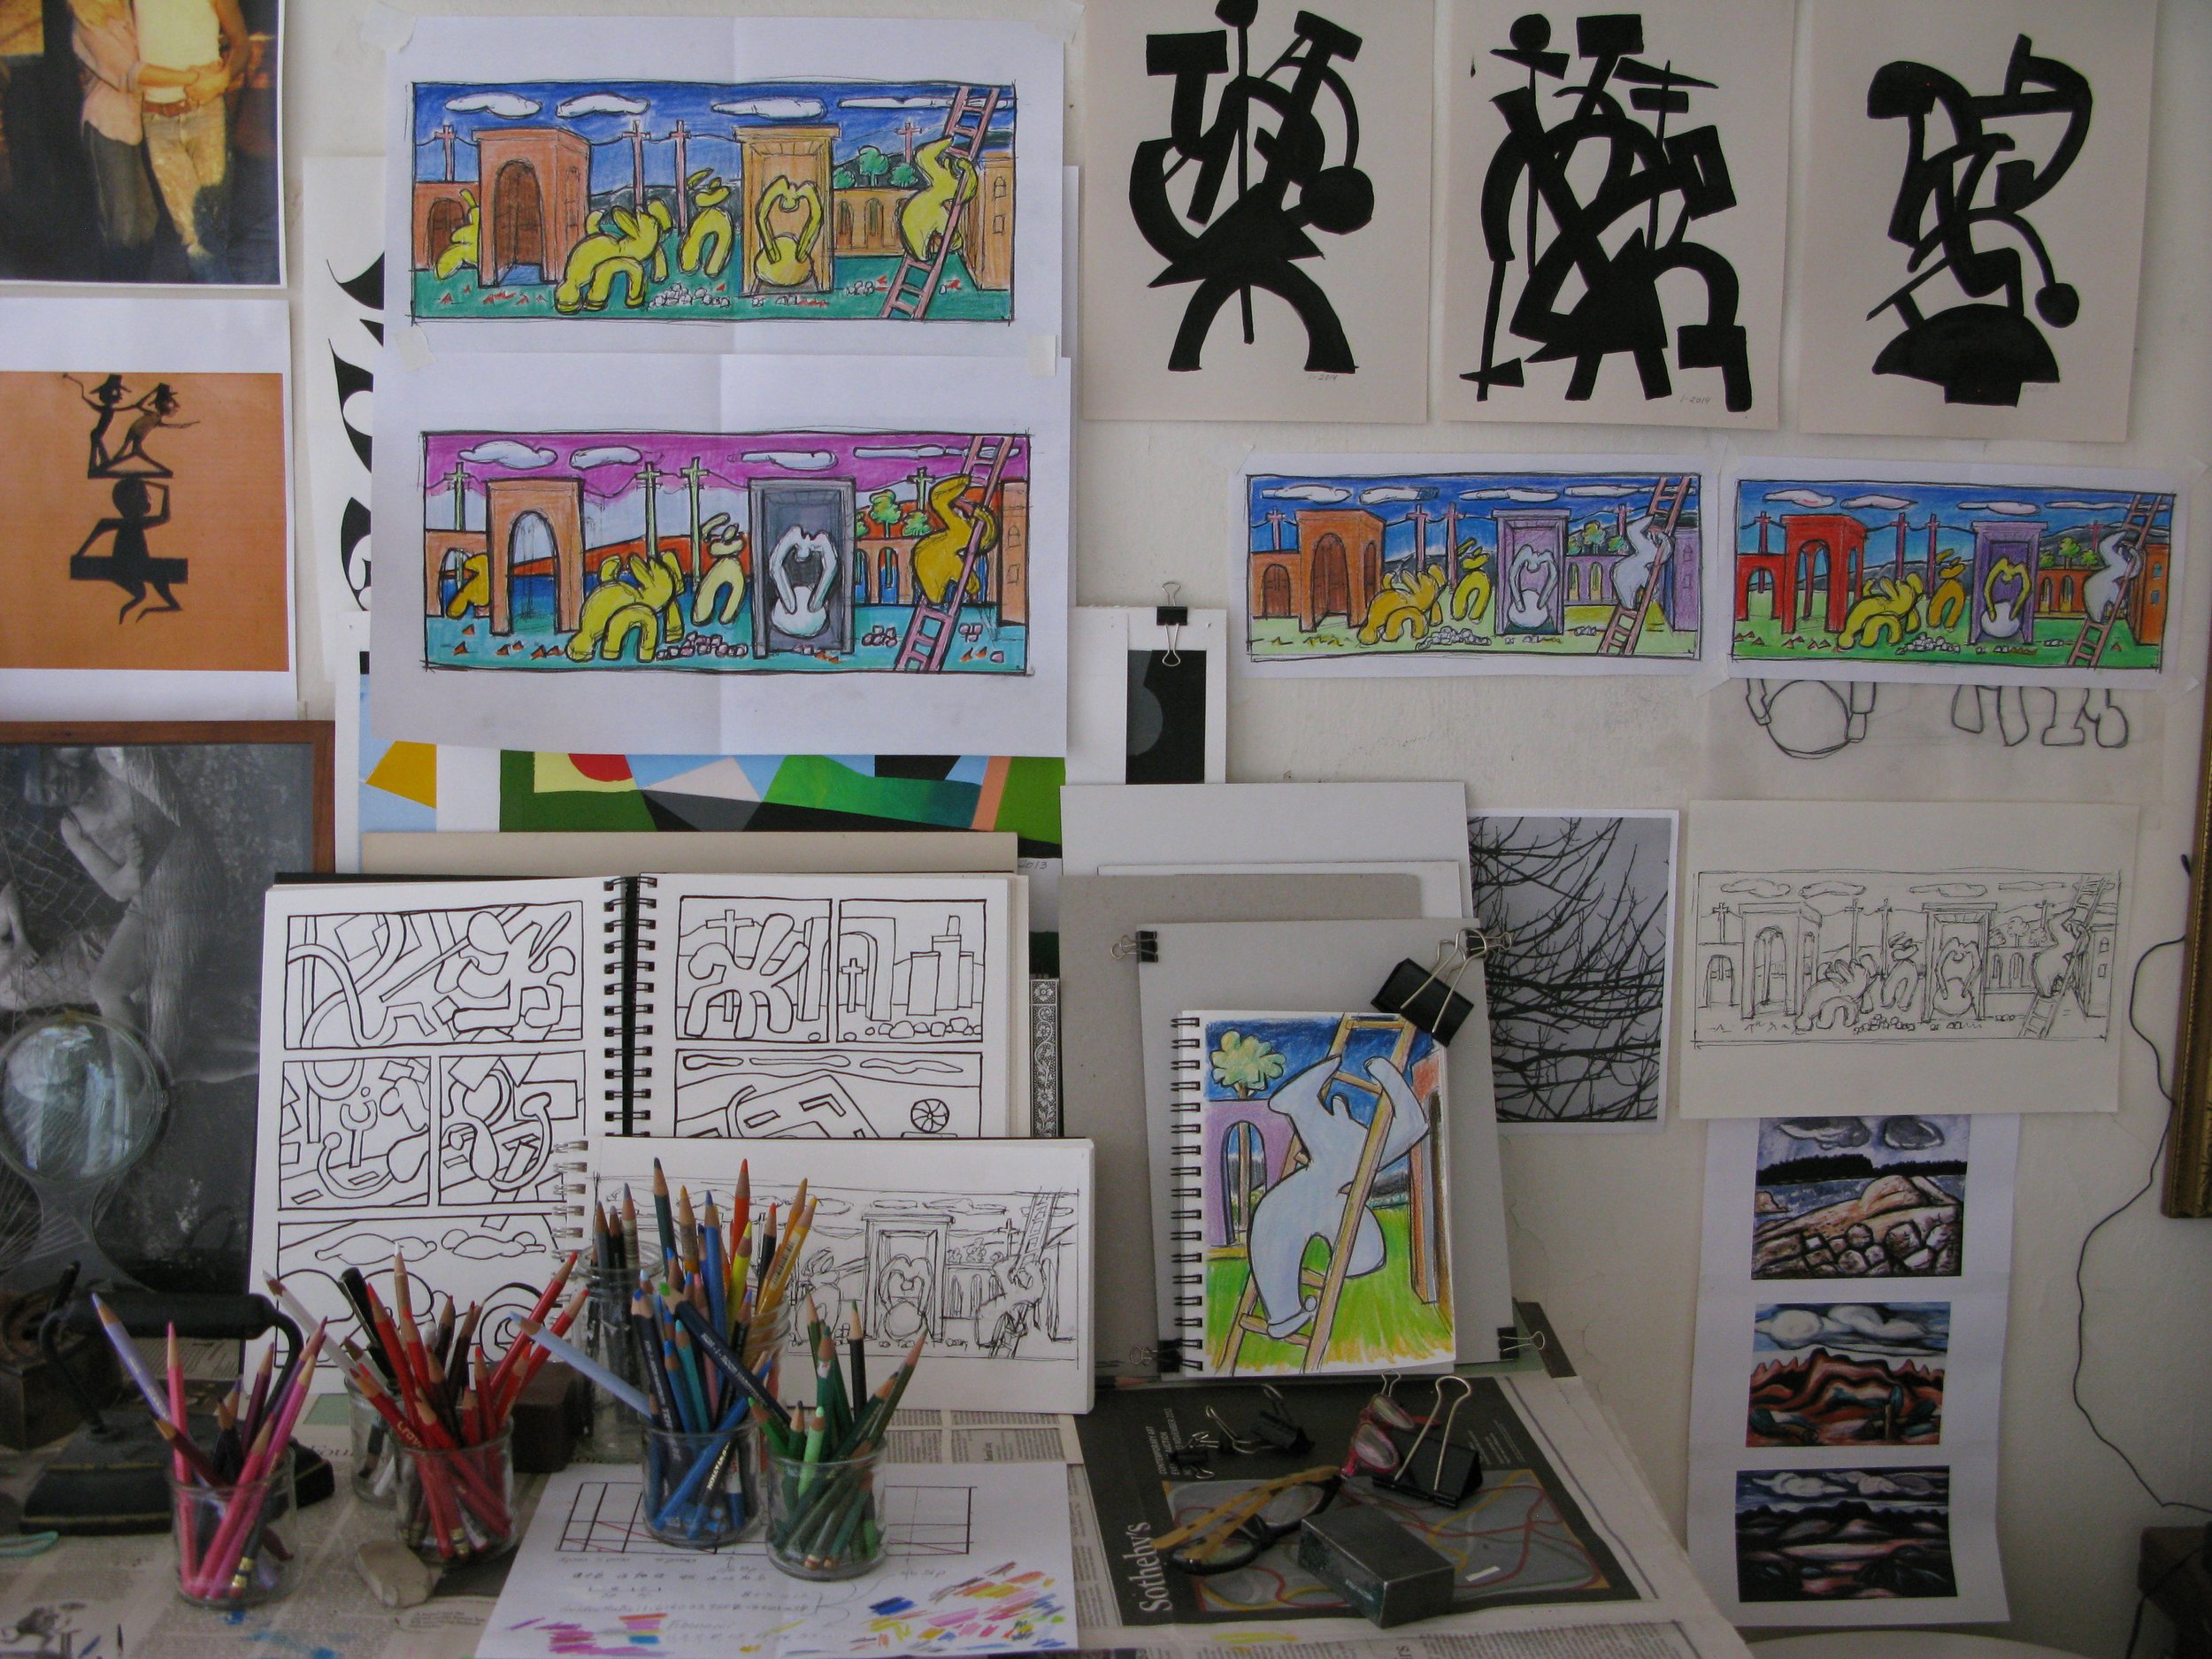 Studio with sketches for "Visitors"